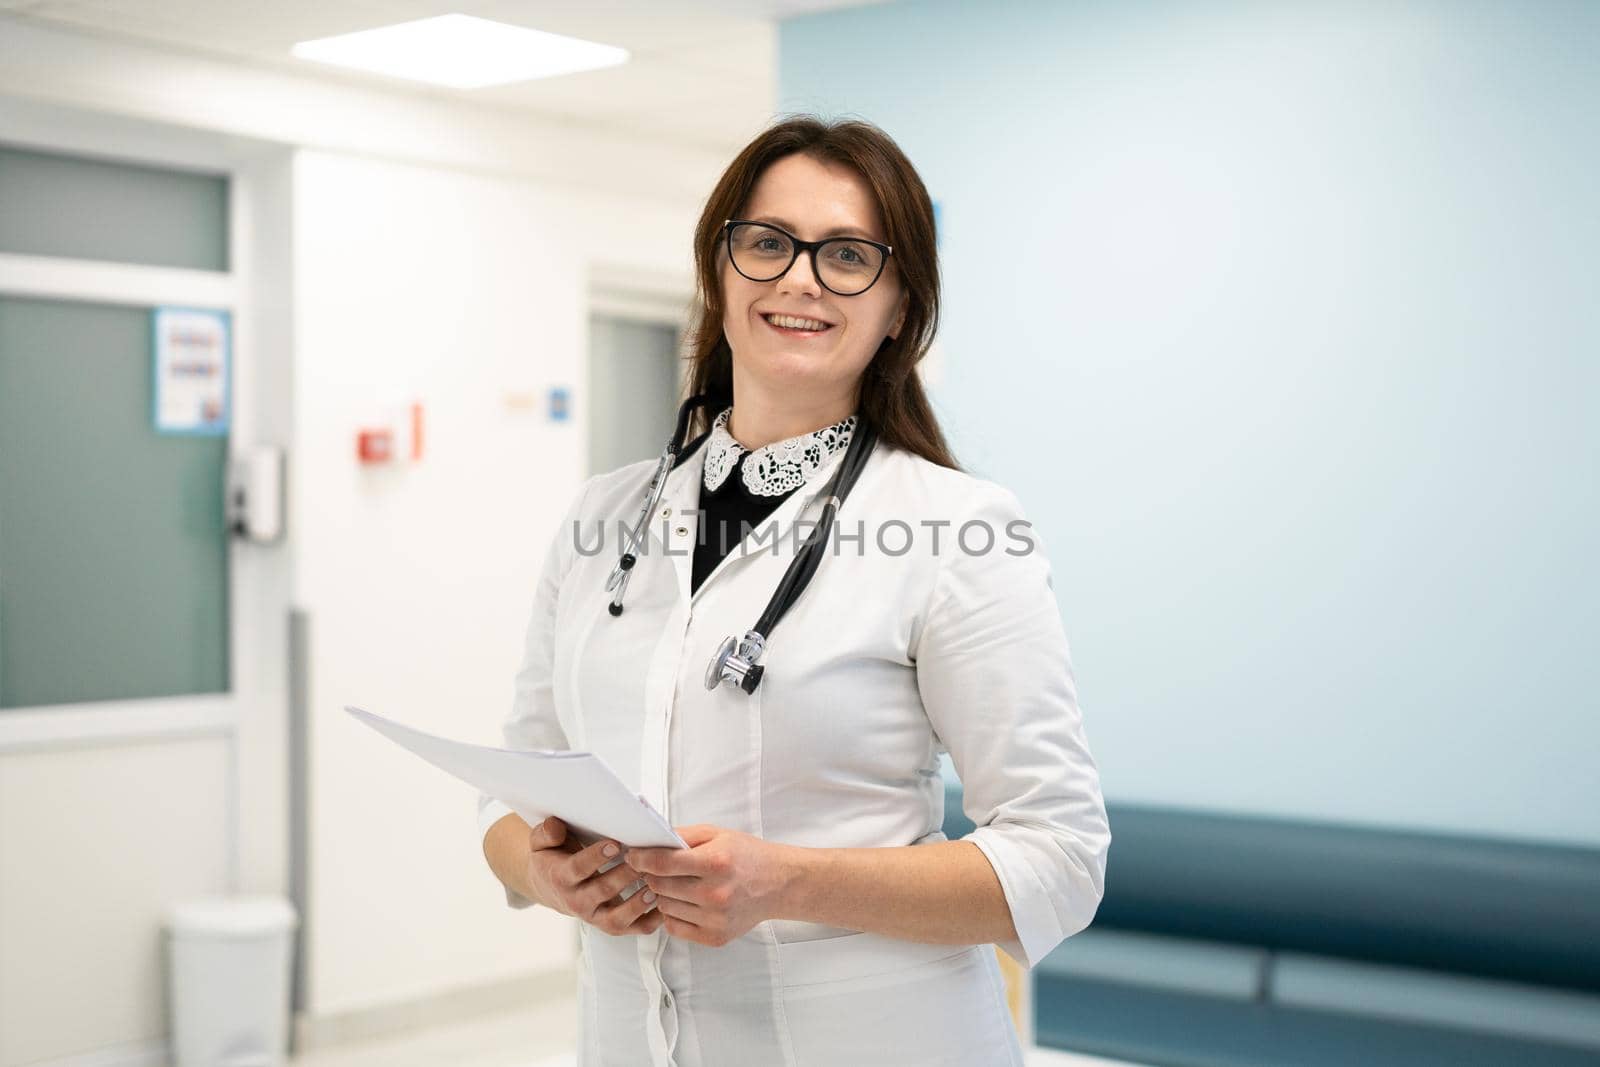 Headshot portrait of smiling millennial female doctor wearing medical uniform and stethoscope looking at camera in the corridor of a modern hospital. Healthcare concept, medical insurance.